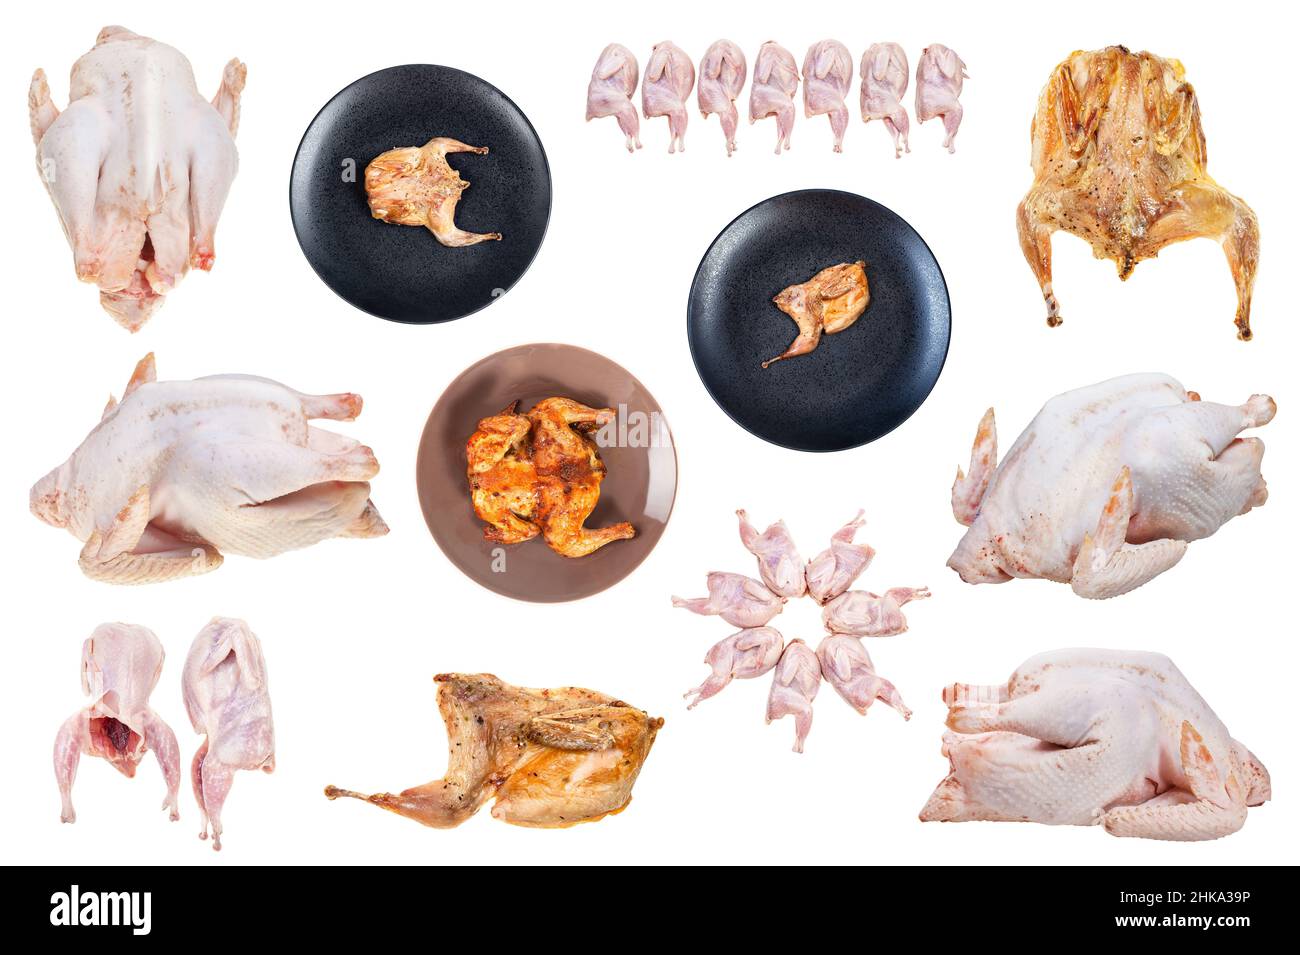 set of various chickens and quails isolated on white background Stock Photo